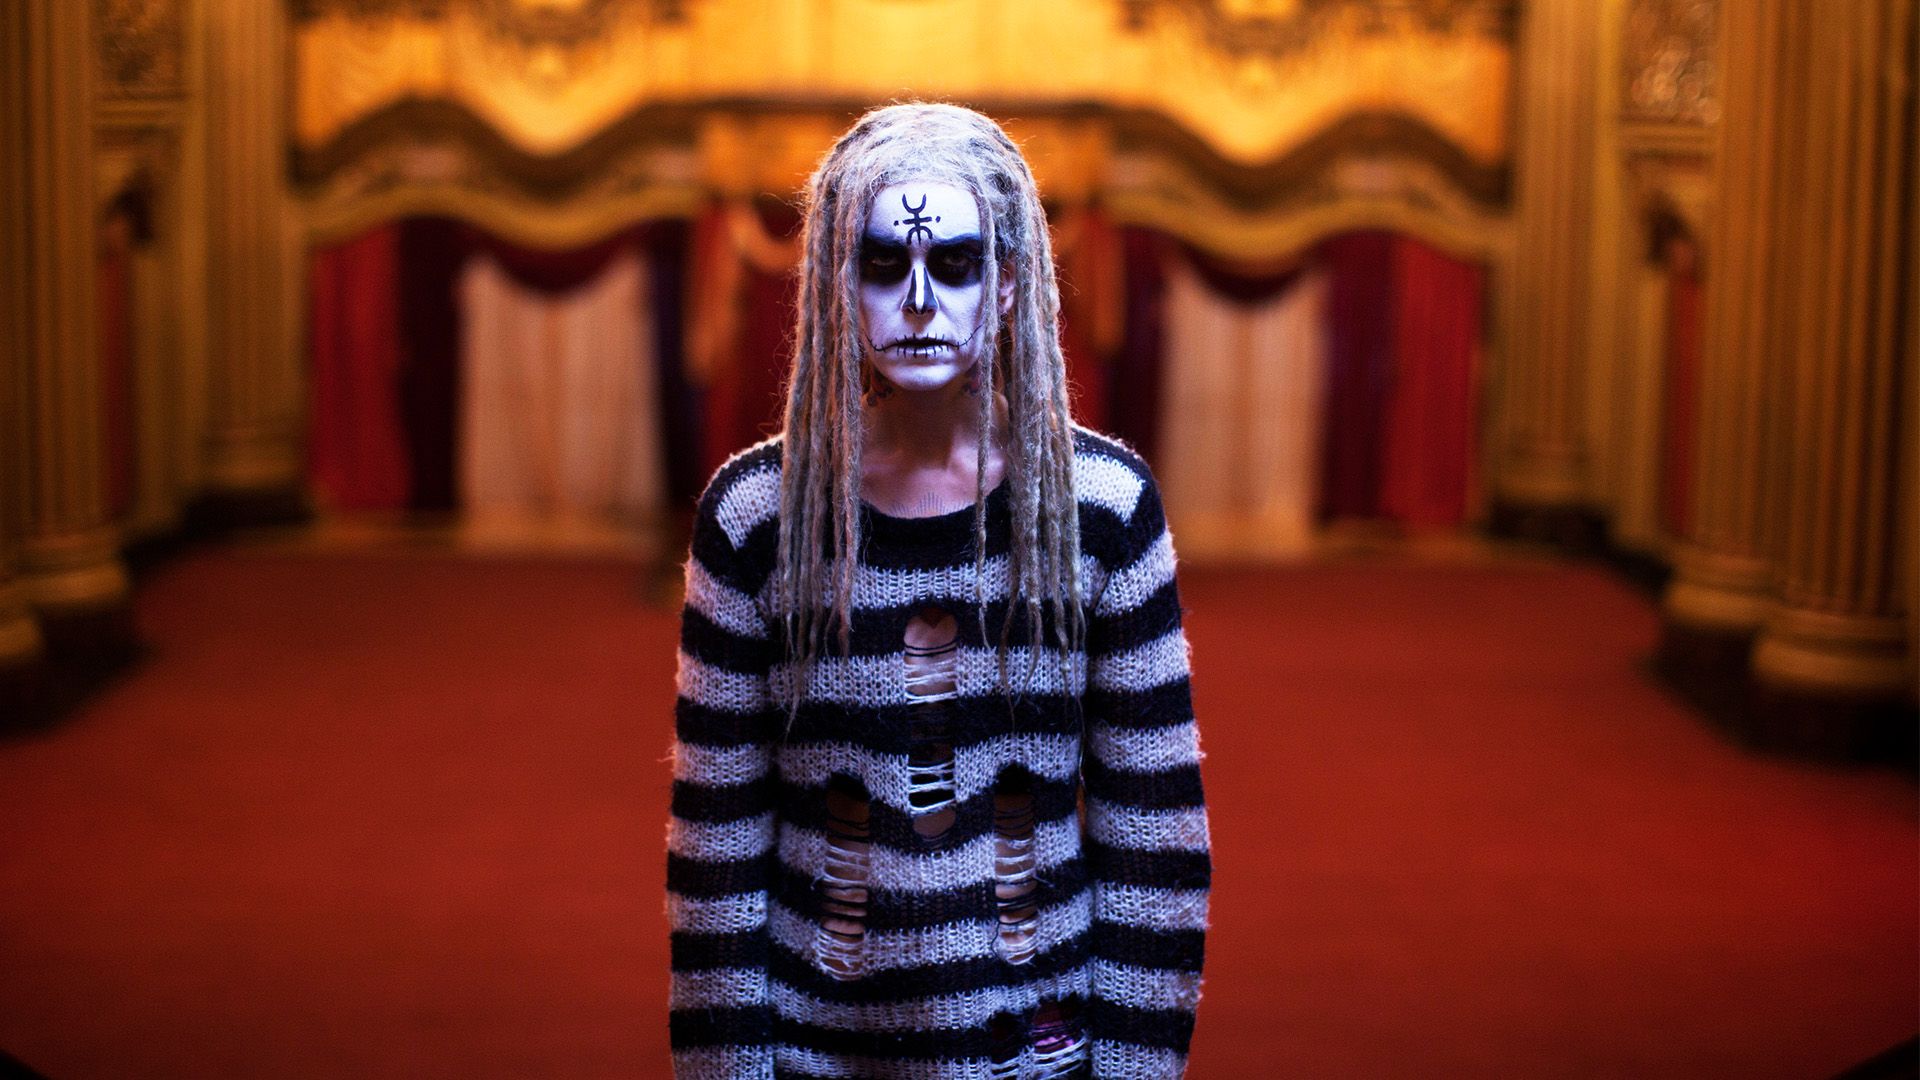 The Lords of Salem background